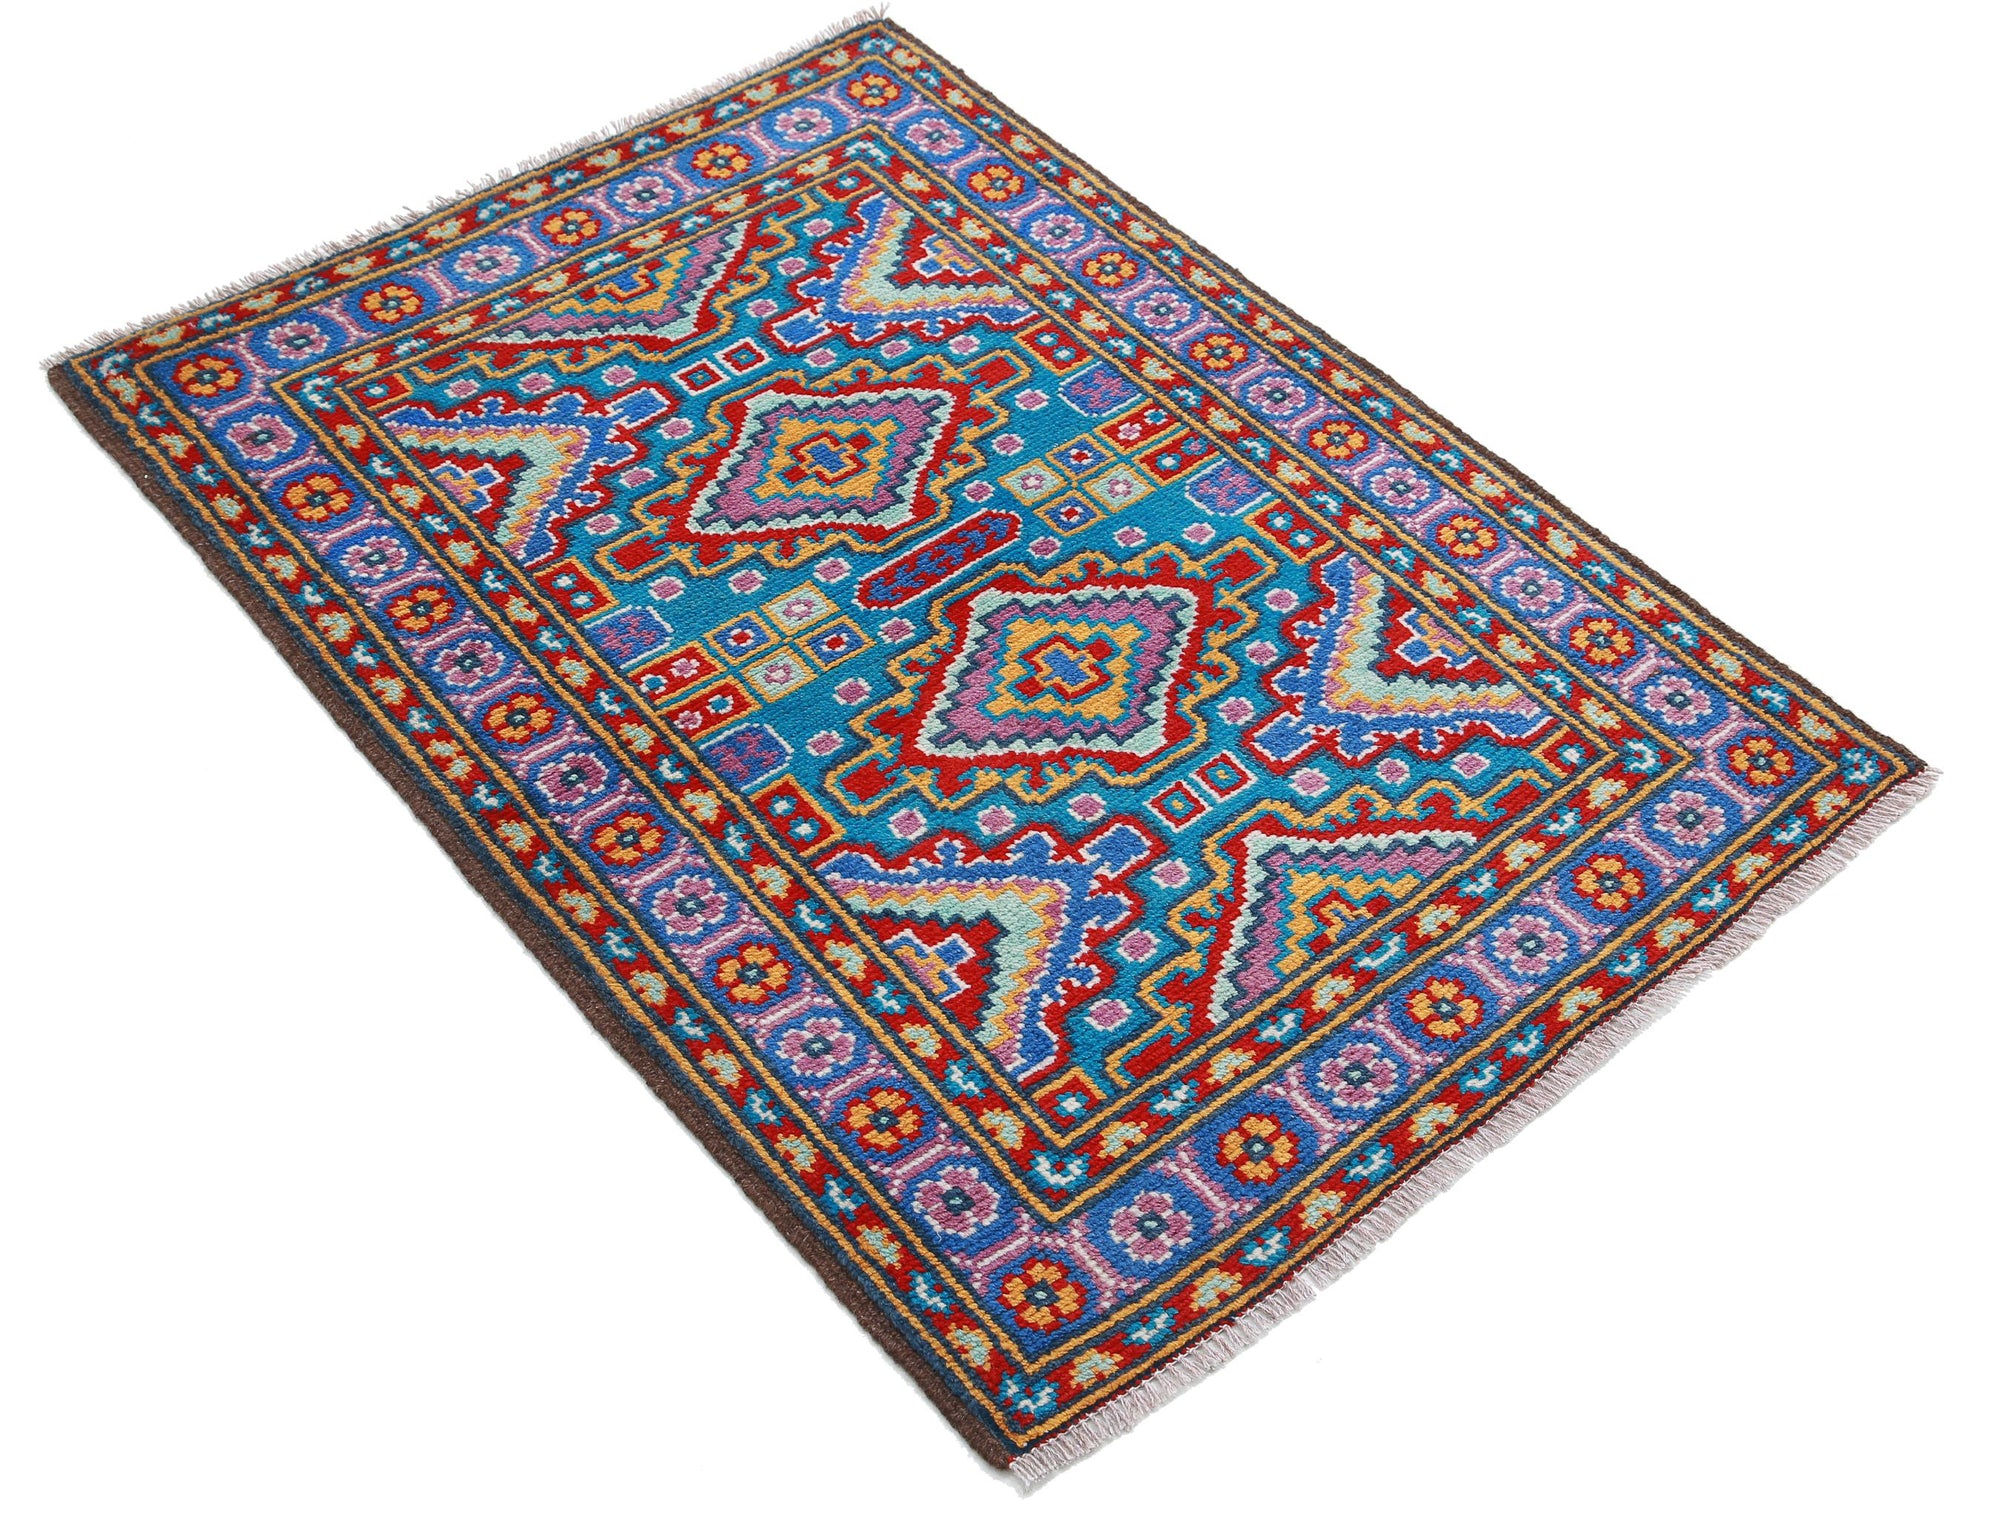 Revival-hand-knotted-qarghani-wool-rug-5014010-1.jpg